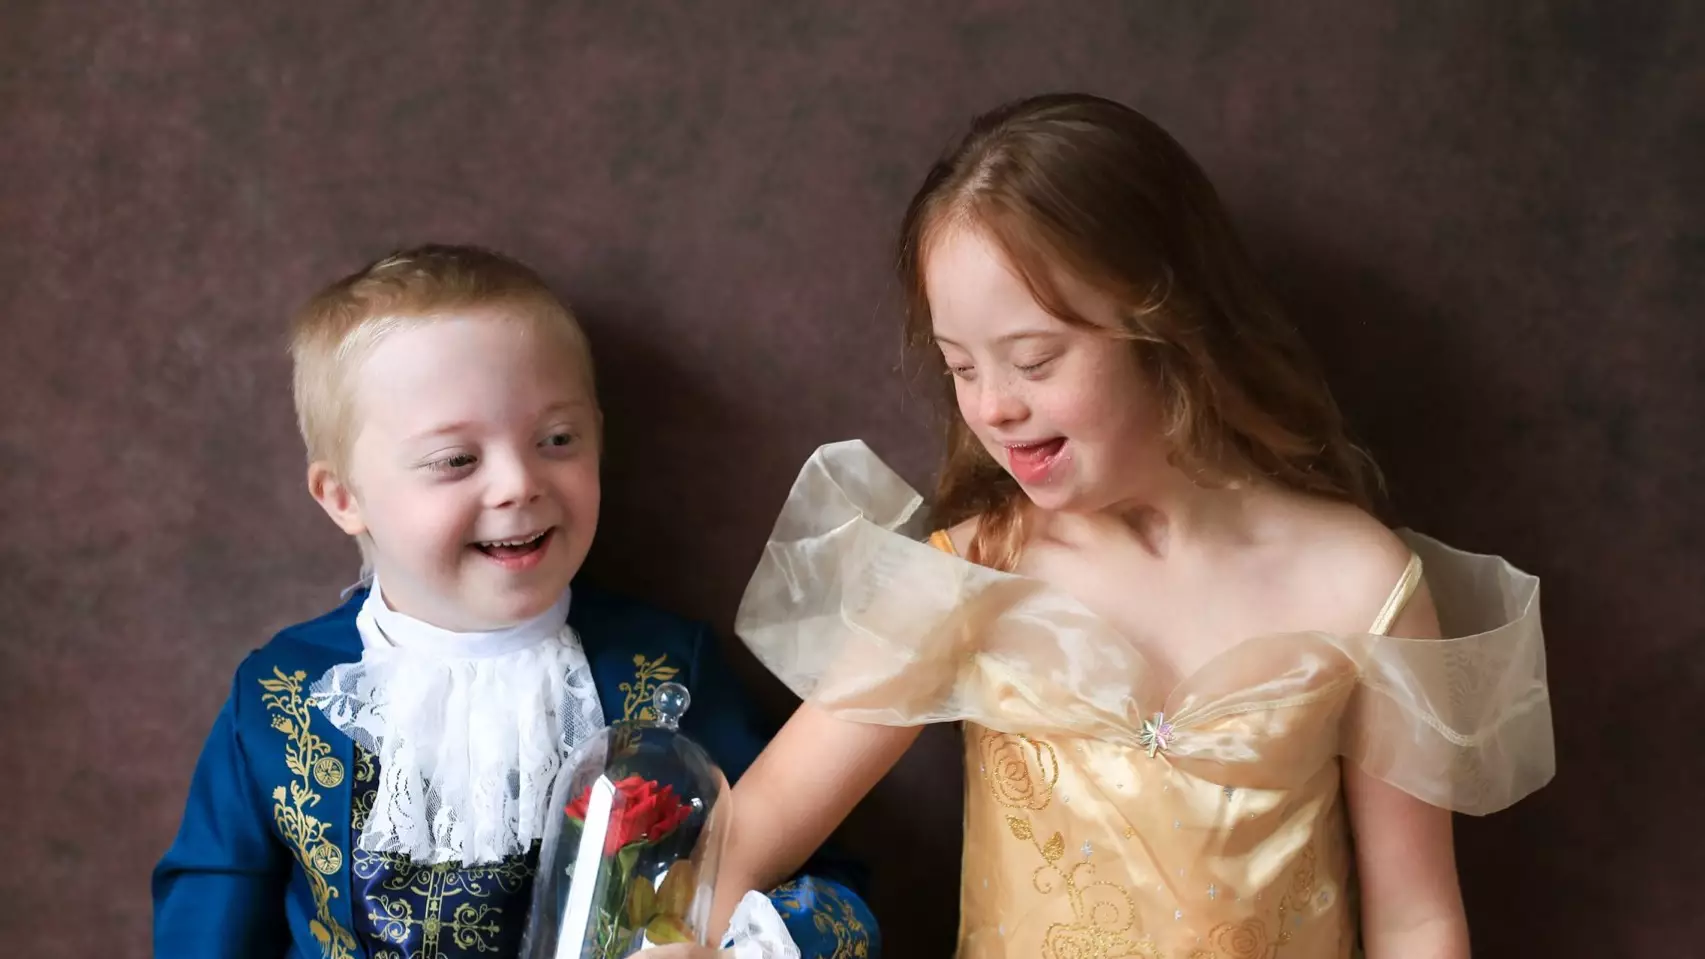 Photoshoot Seeing Kids With Down's Syndrome Dress Up As Disney Characters Goes Viral